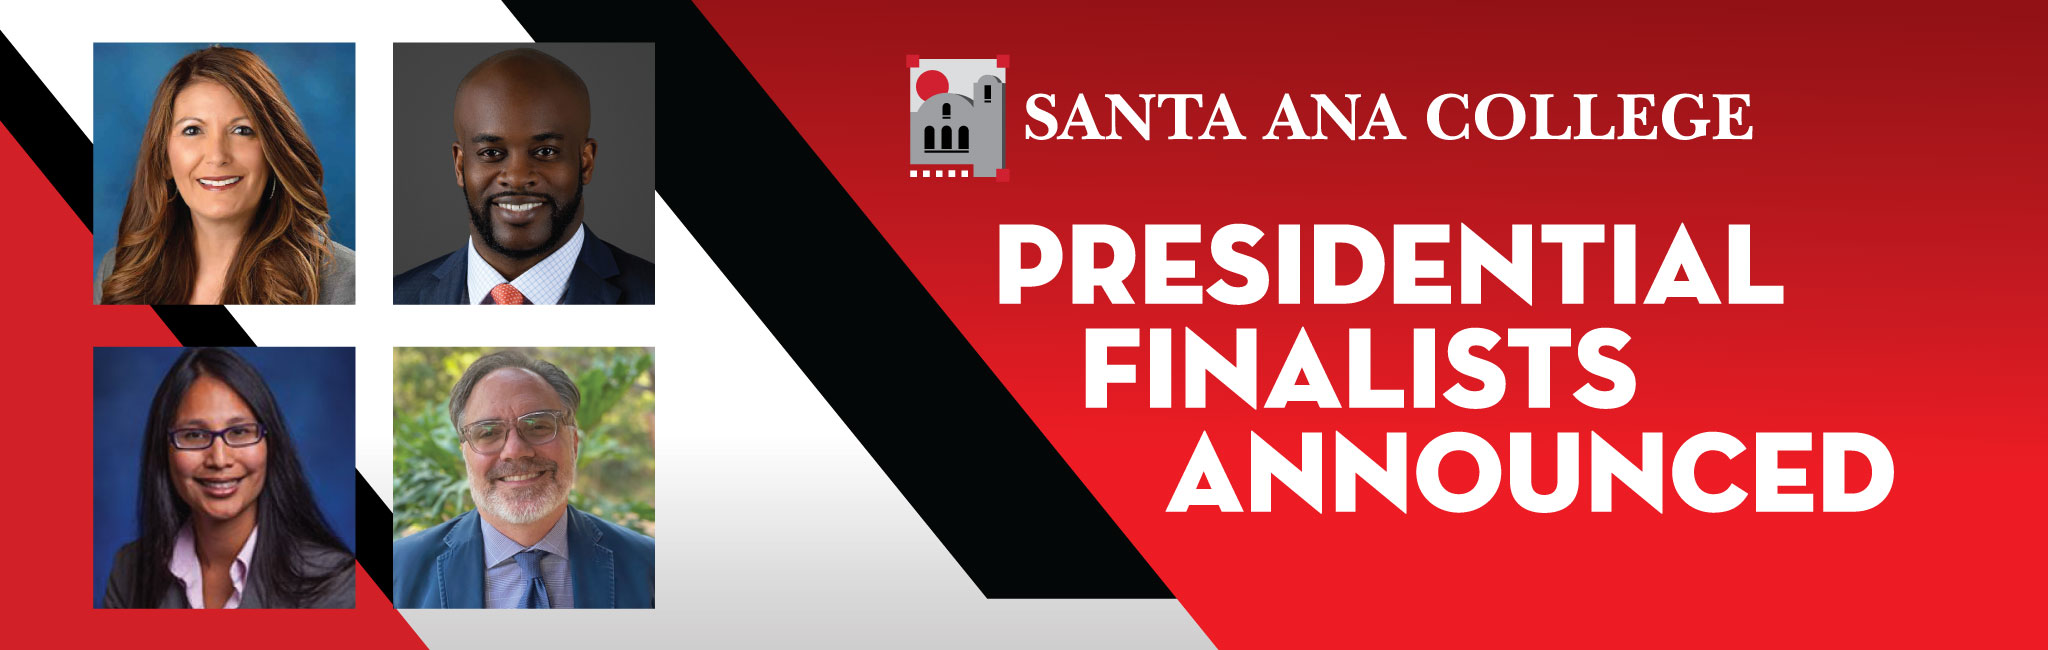 SAC President Finalists Announced